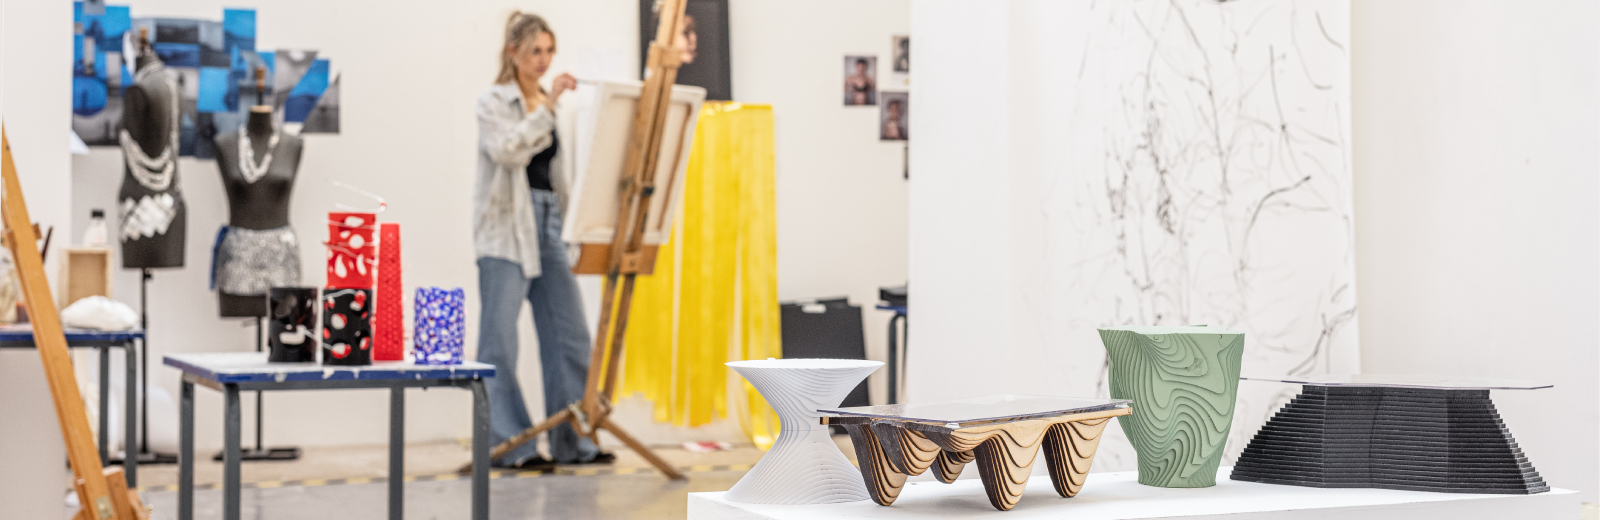 3D models in the foreground with a female student painting on an easel in the background